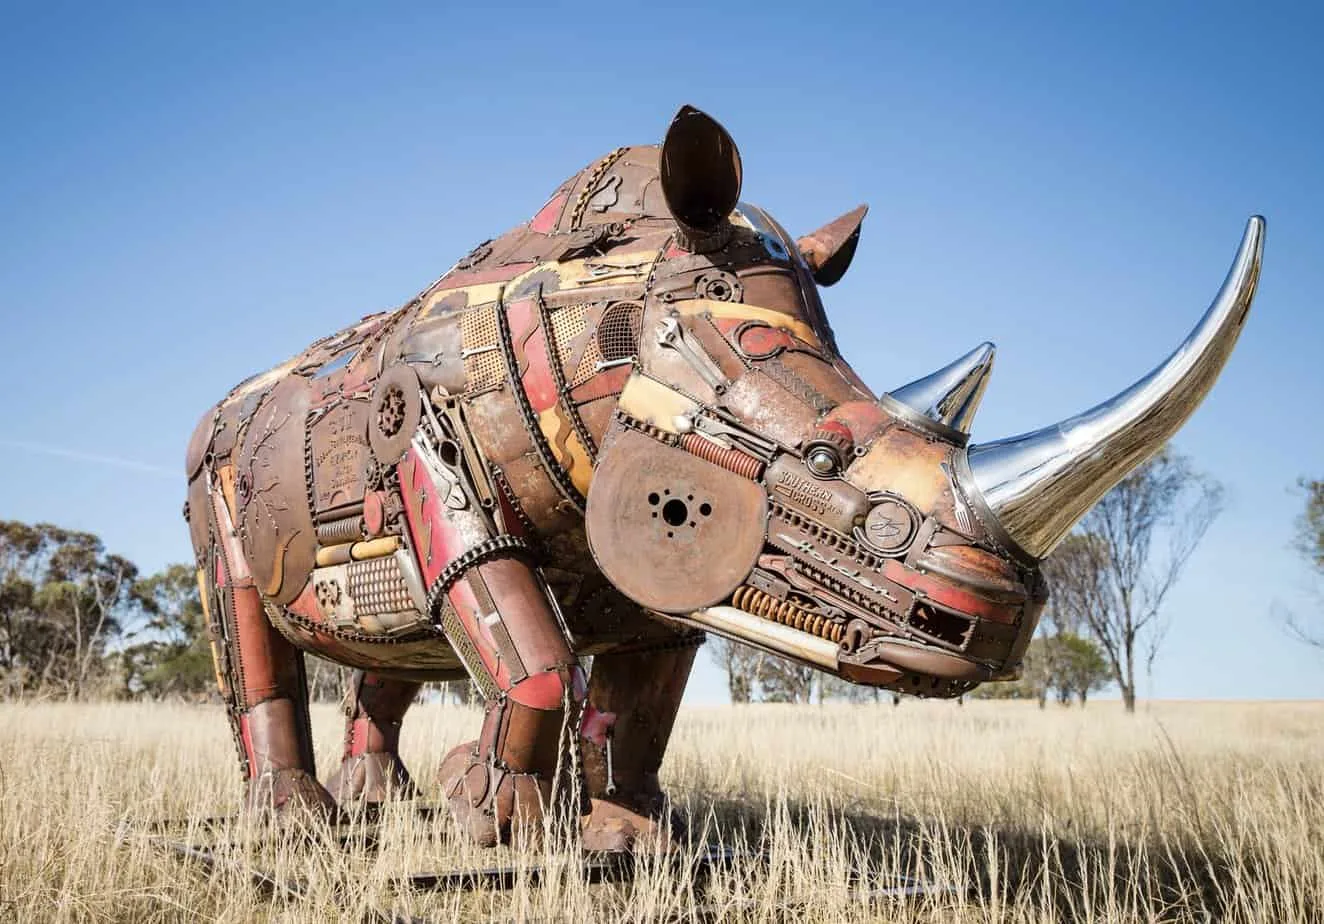 Jordan Sprigg's masterpiece, an extinct African rhino made from recycled metals found from retired machinery, scrap heaps and clearance sales